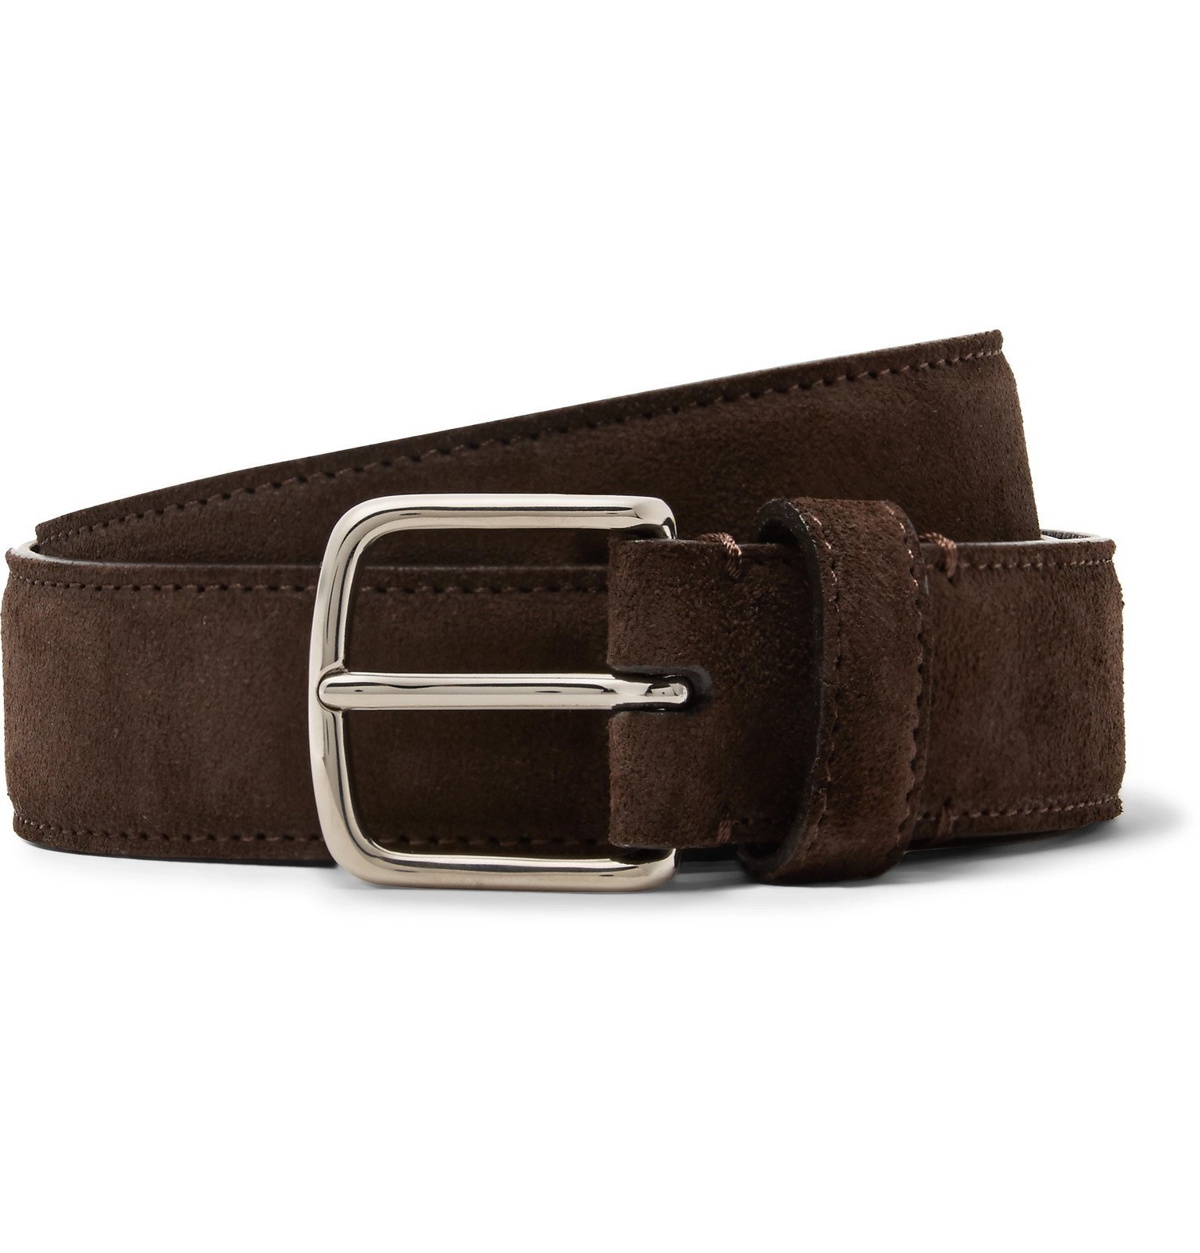 The Row - 3cm Black Suede Belt - Brown The Row